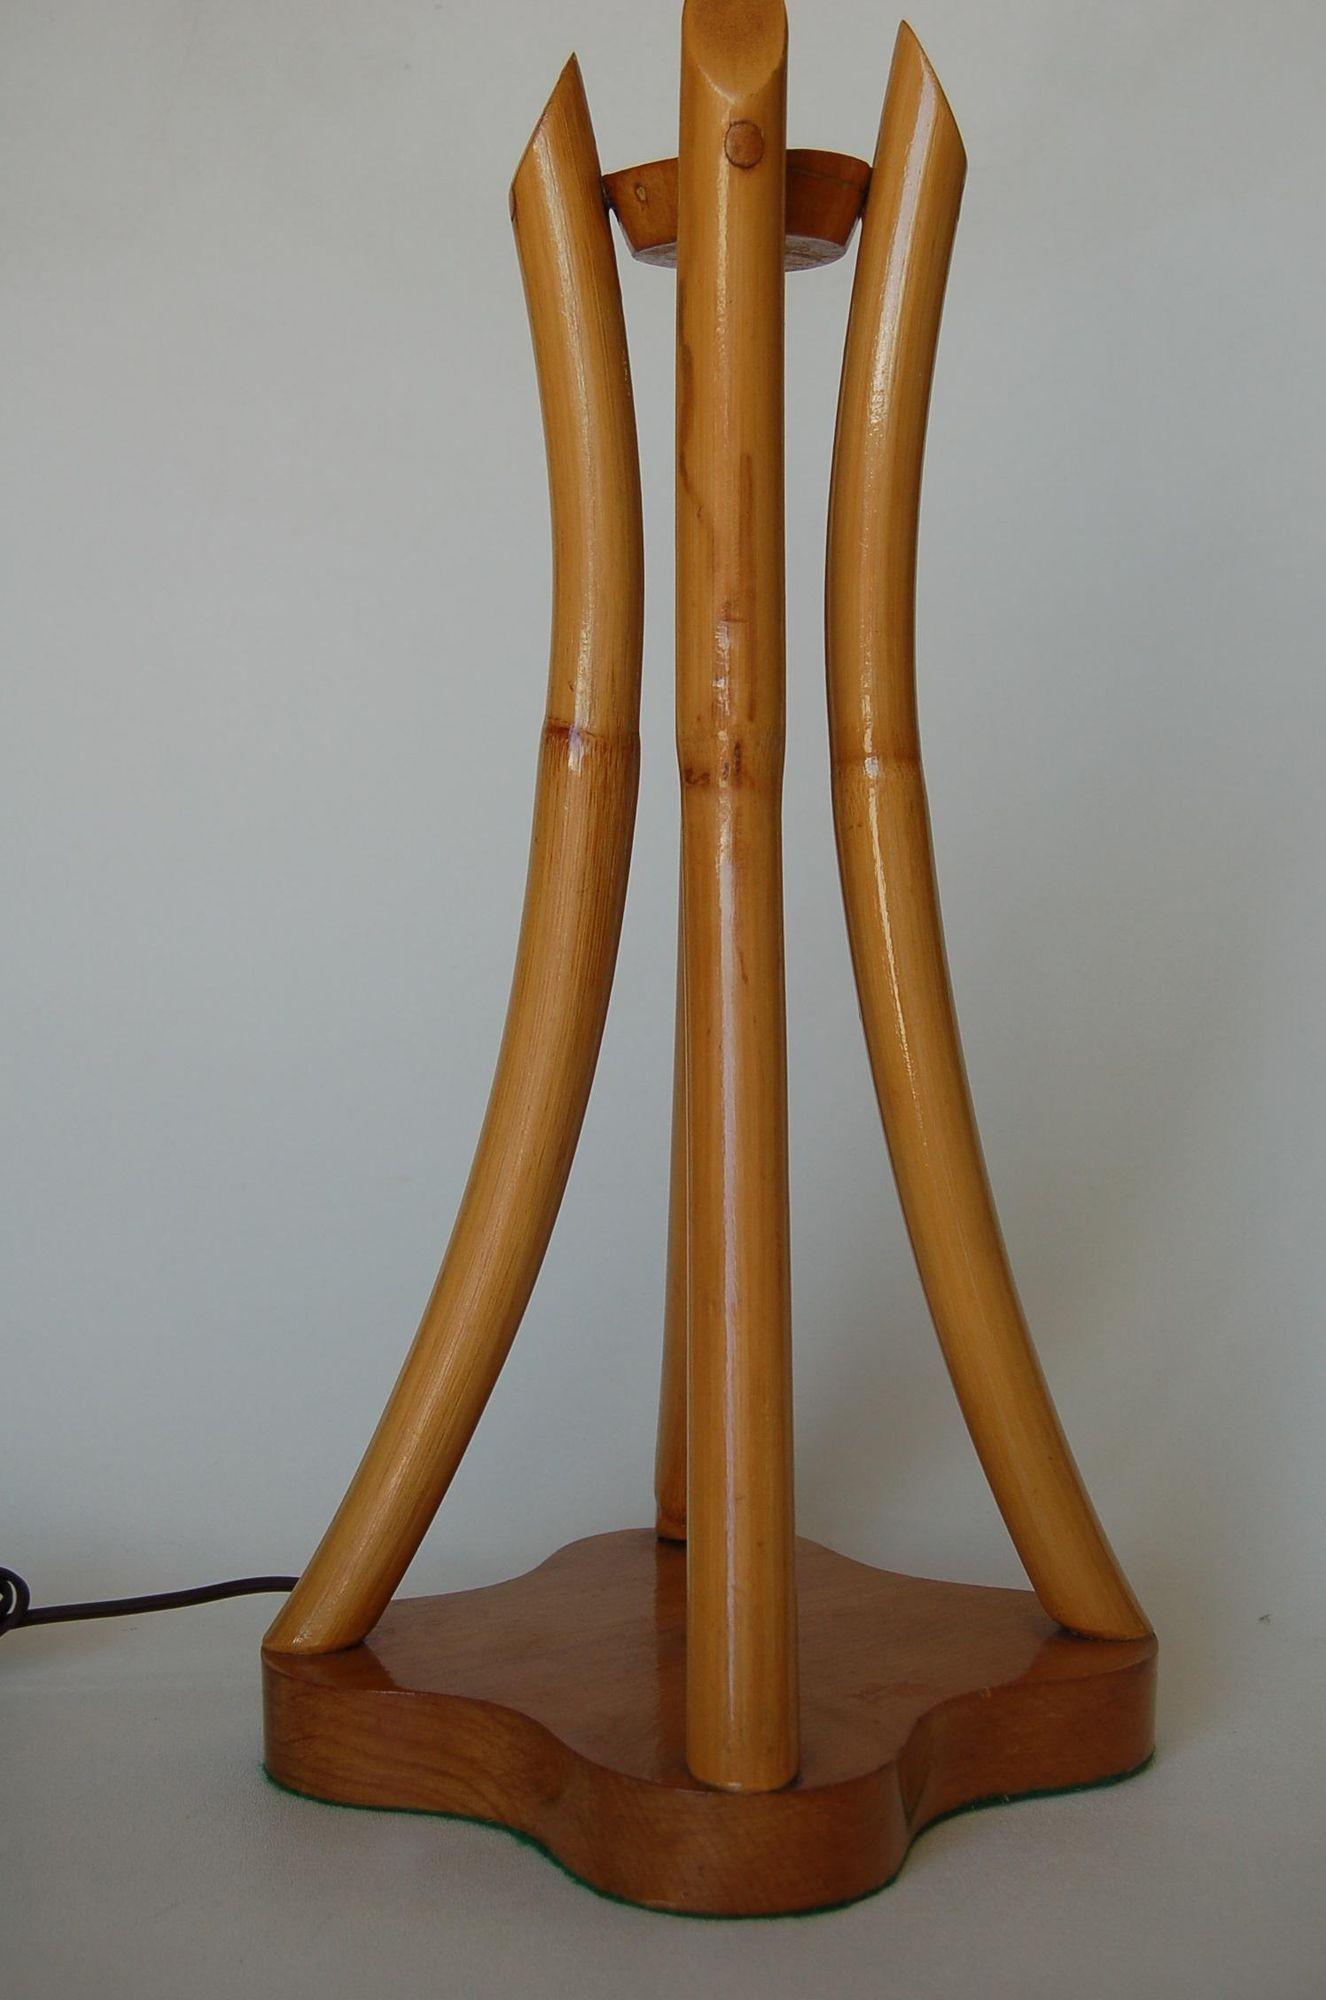 Restored pair of four-strand scalloped rattan bent pole table lamps on a mahogany base with brass center rob.

Measures 8